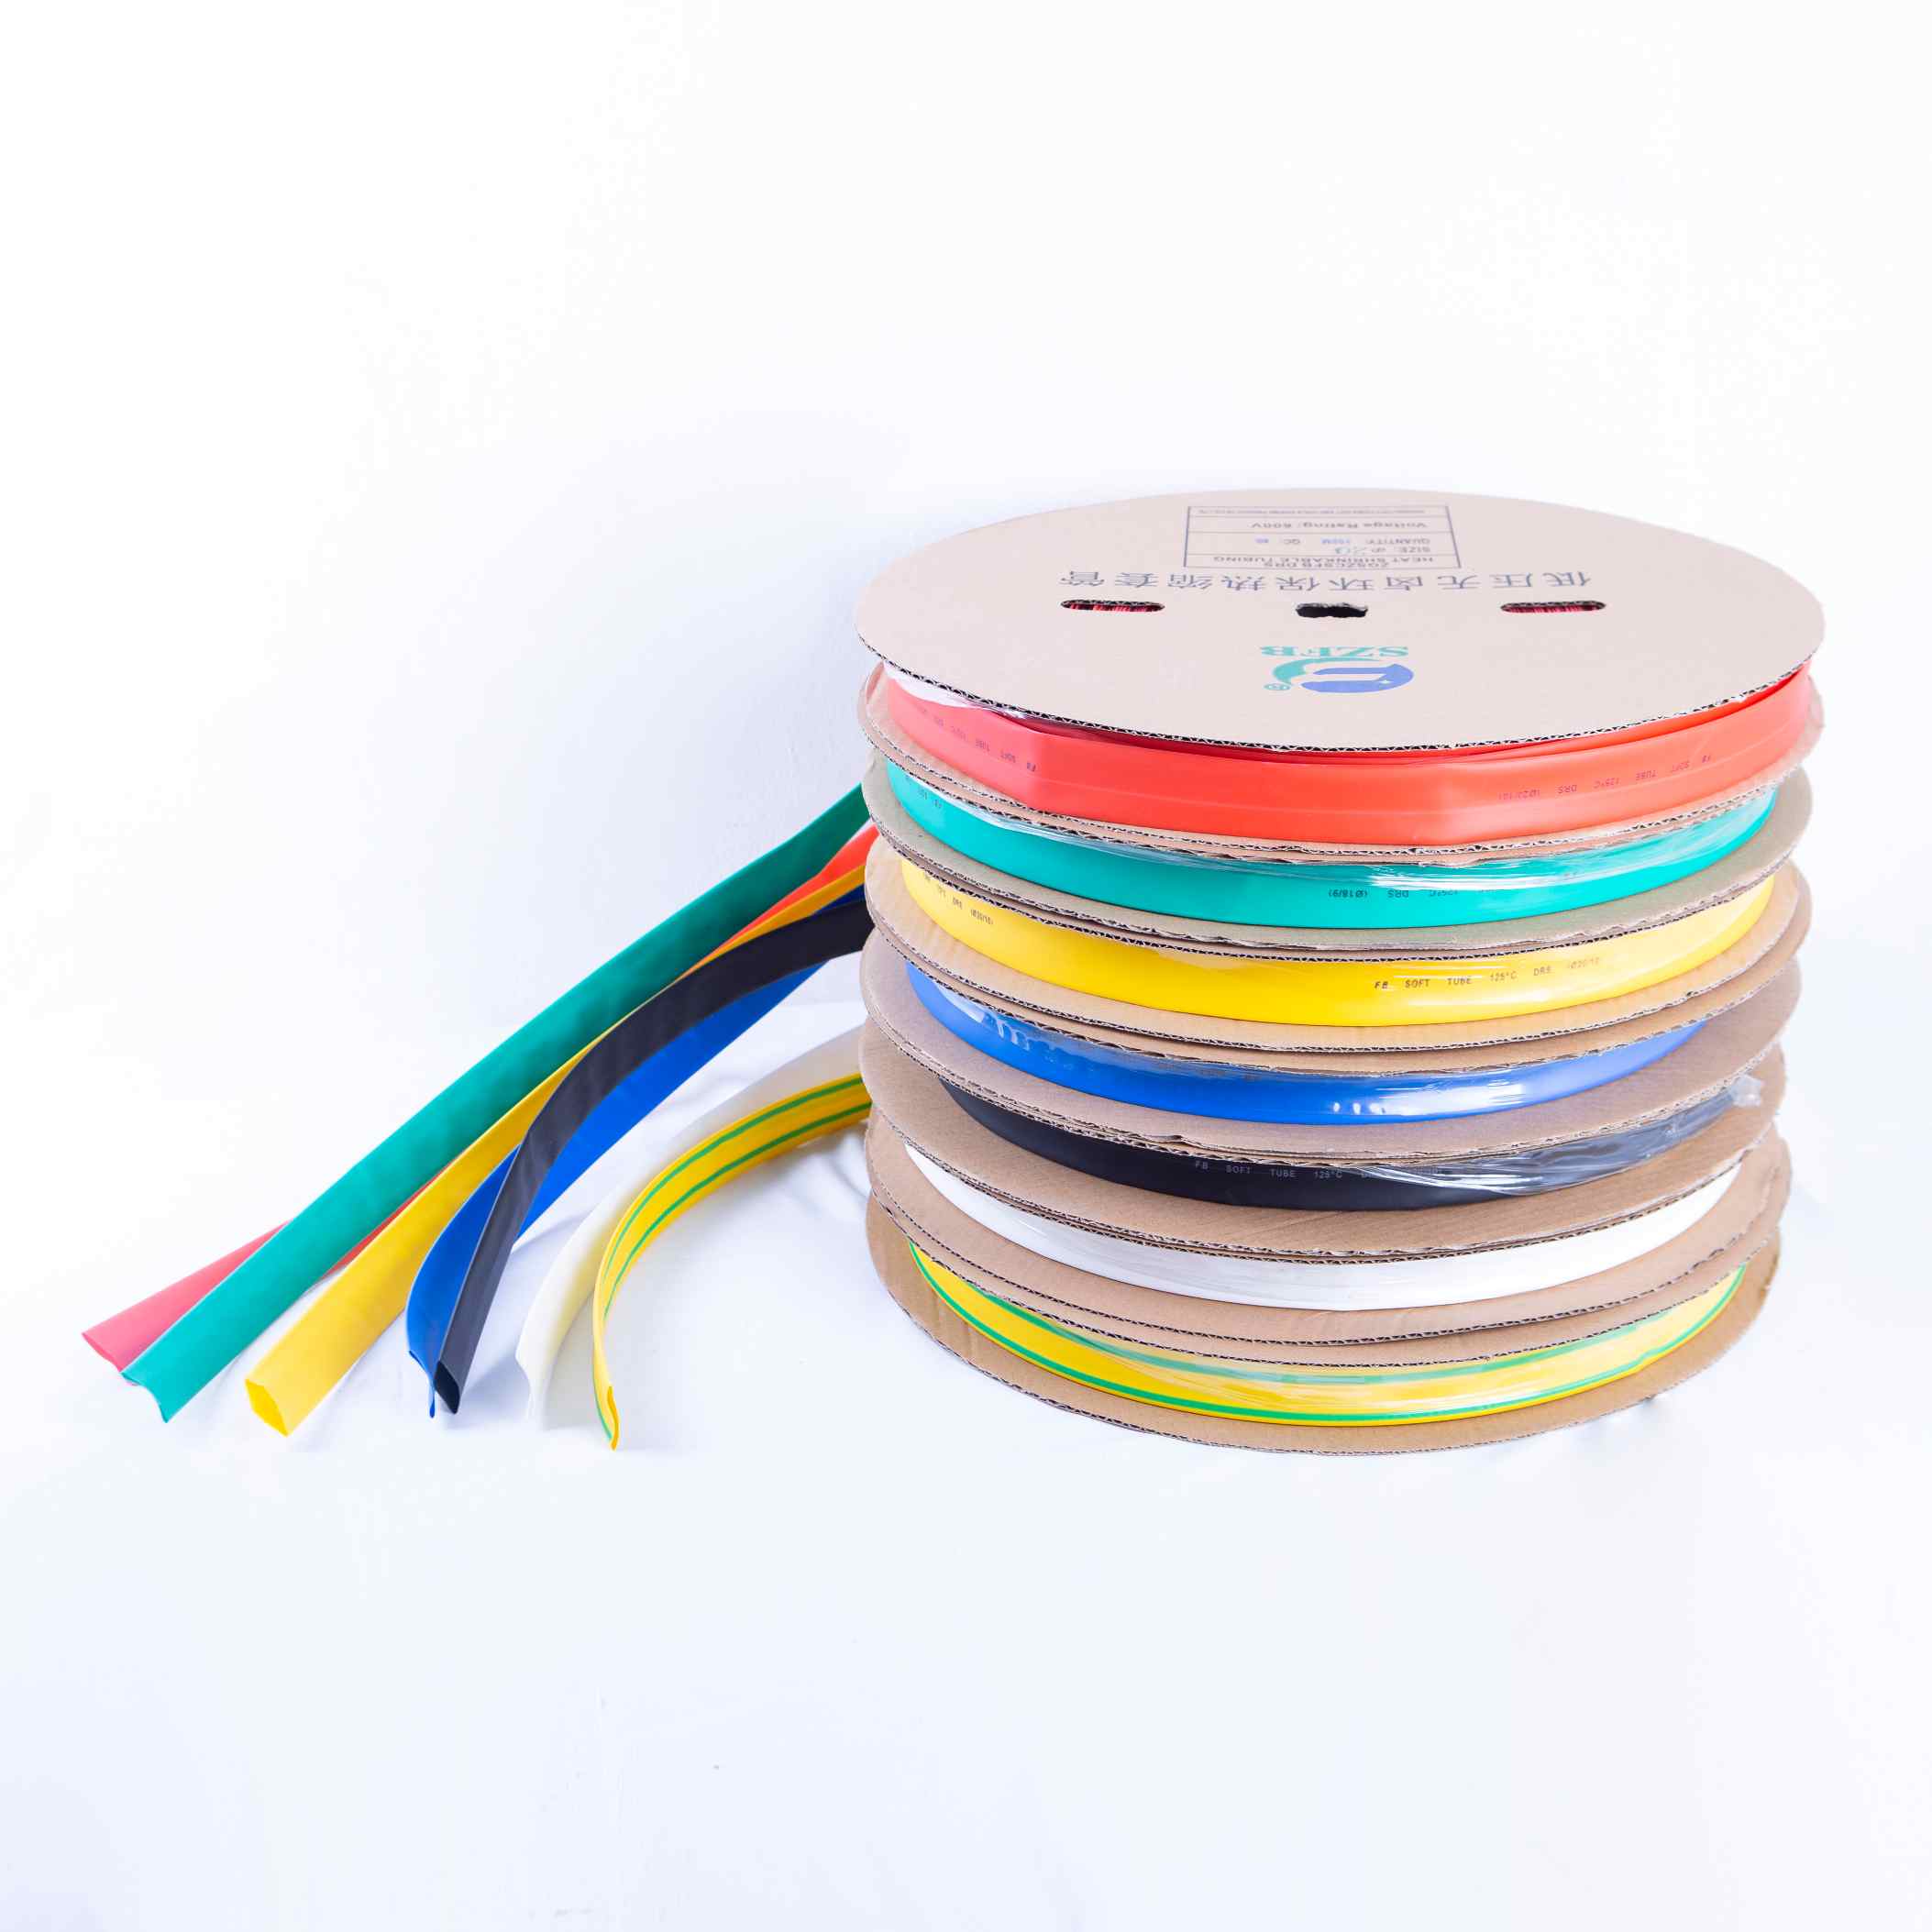 What is heat shrink tubing